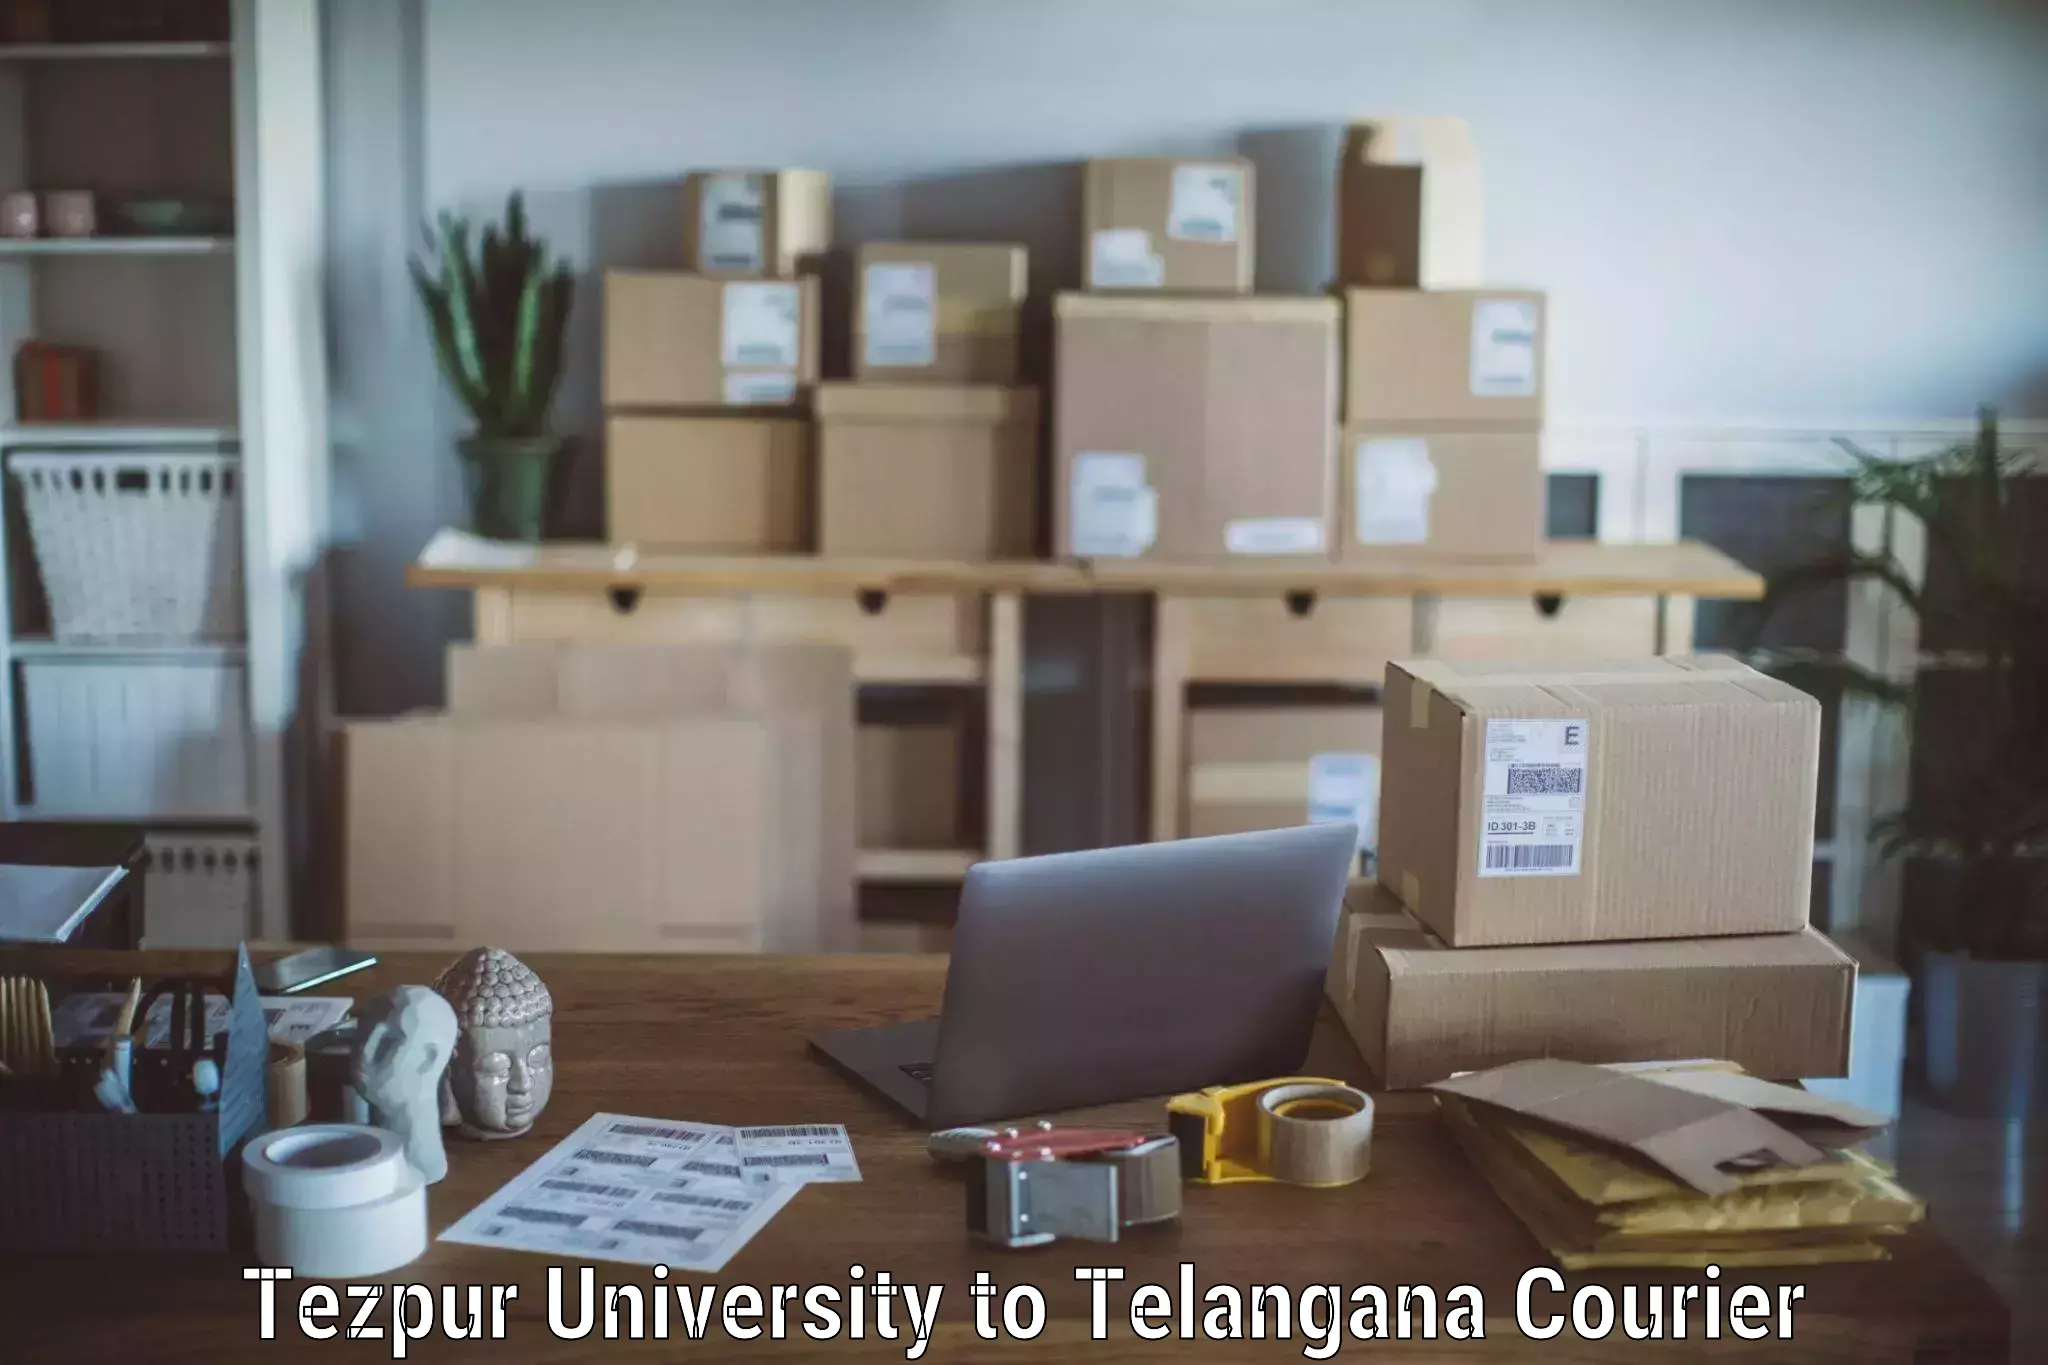 Professional relocation services Tezpur University to Bhupalpally